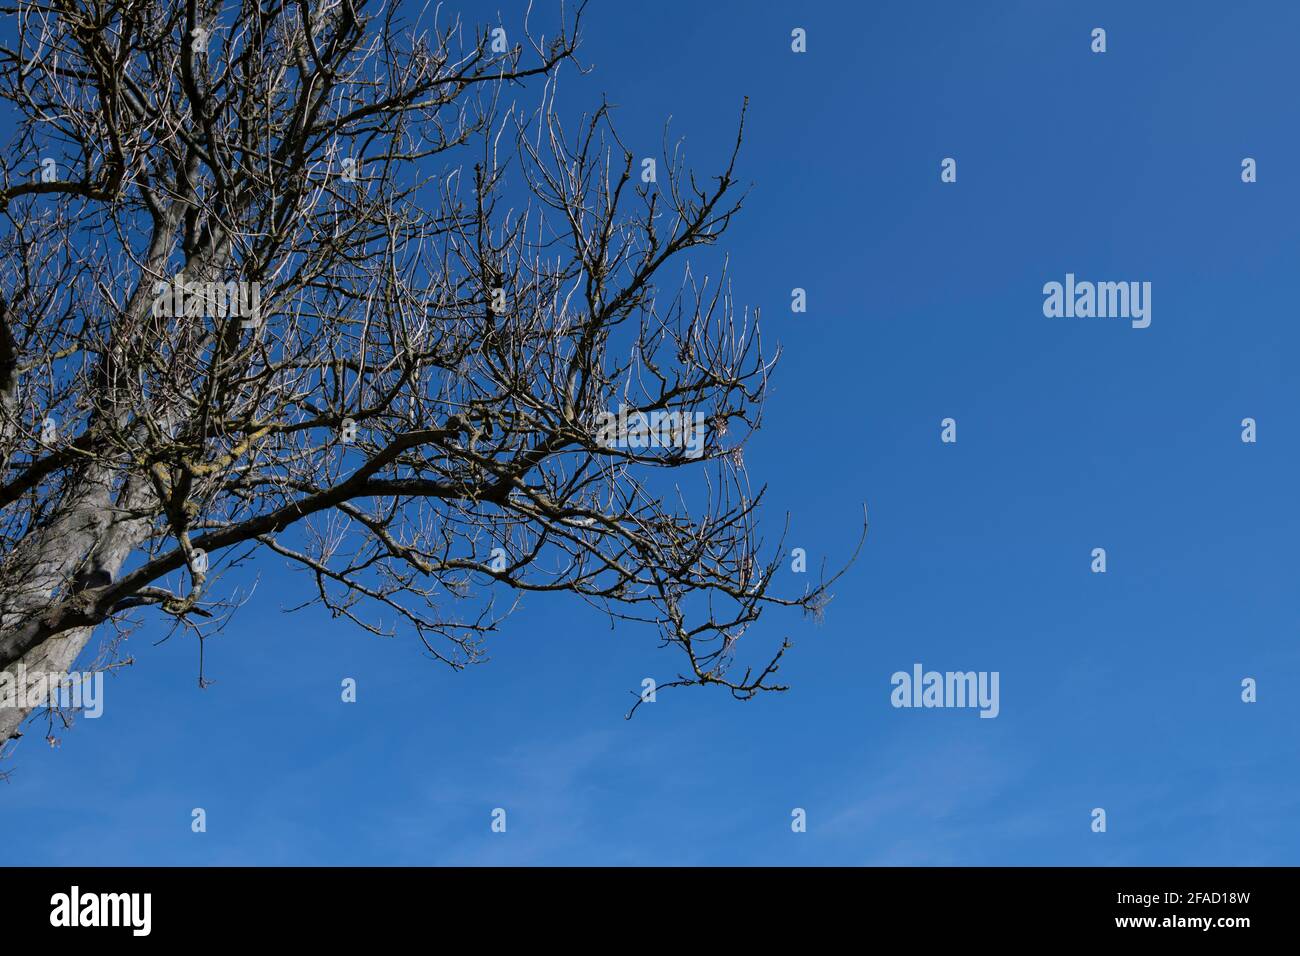 Tree against a blue sky poster - a wonderful springtime blue sky with a tree coming into bud Stock Photo